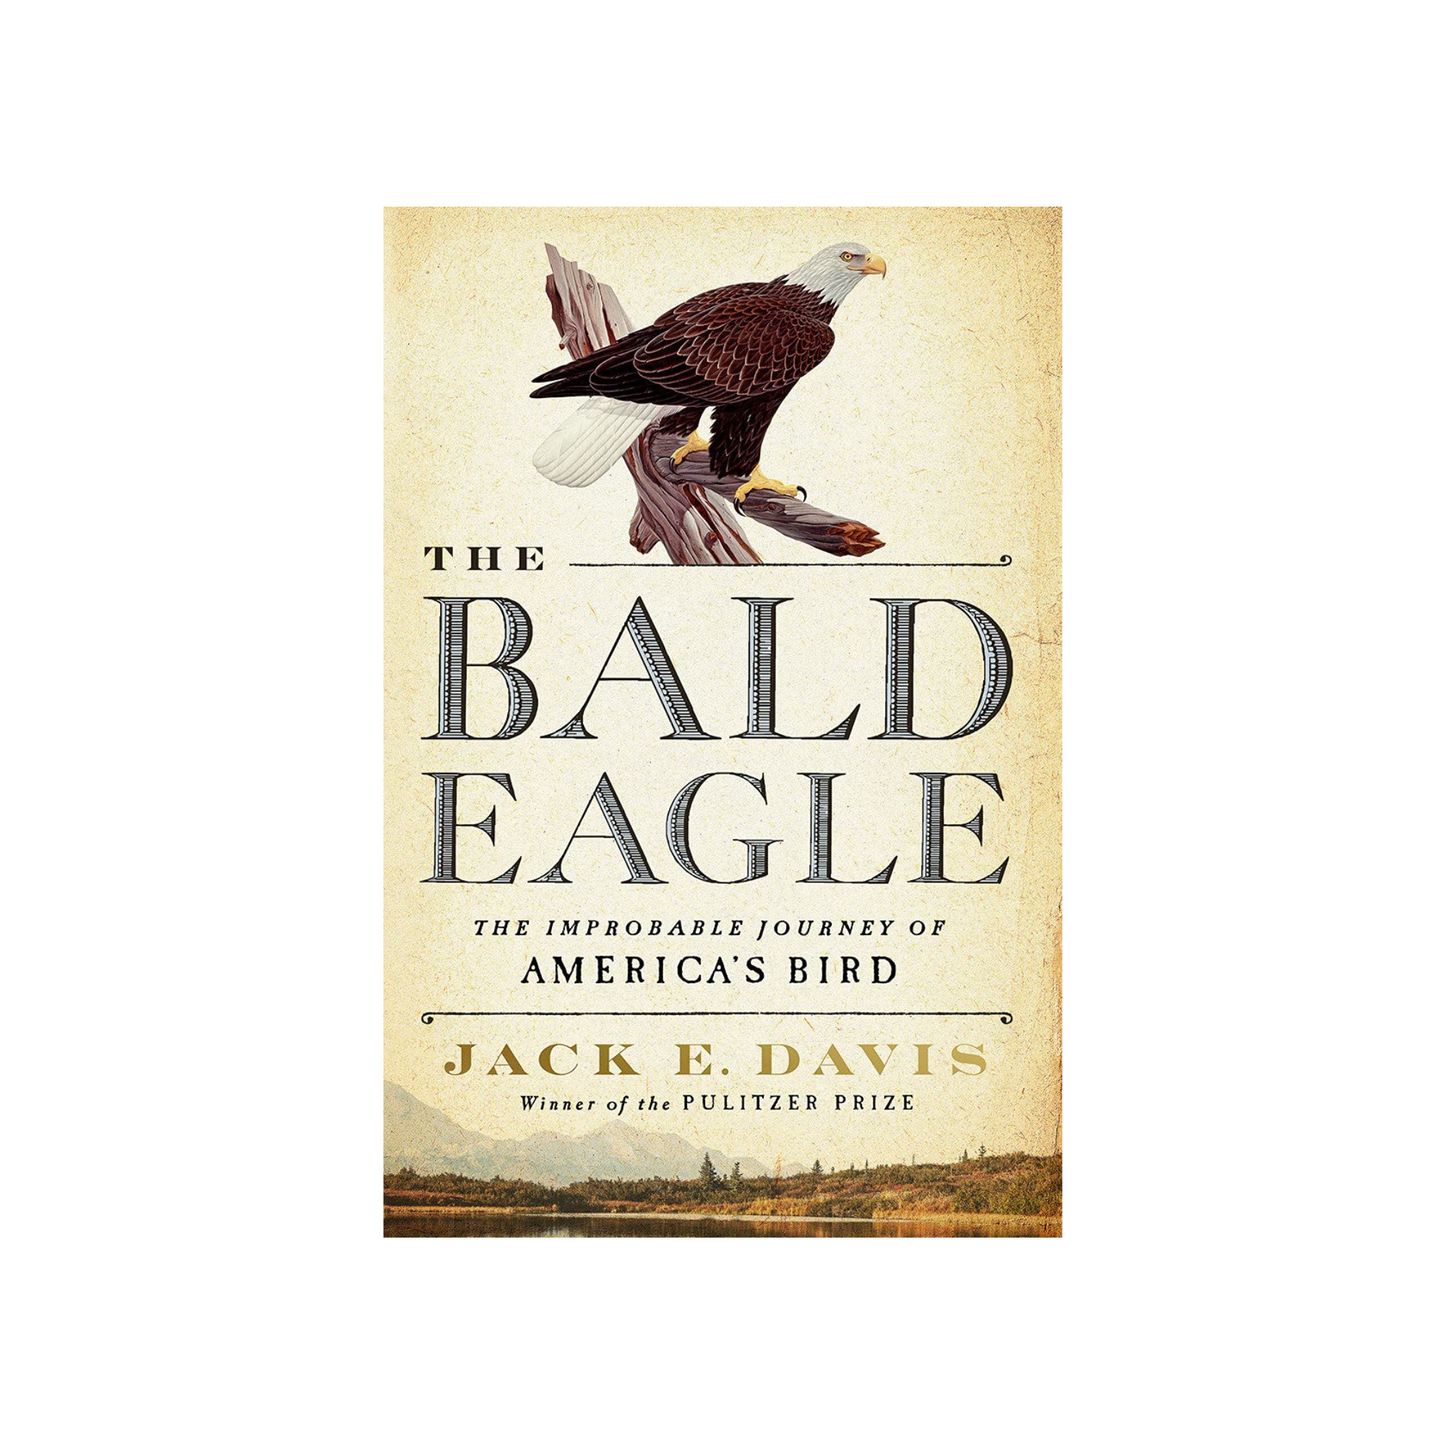 The Bald Eagle: The Improbable Journey of America's Bird (Paperback)